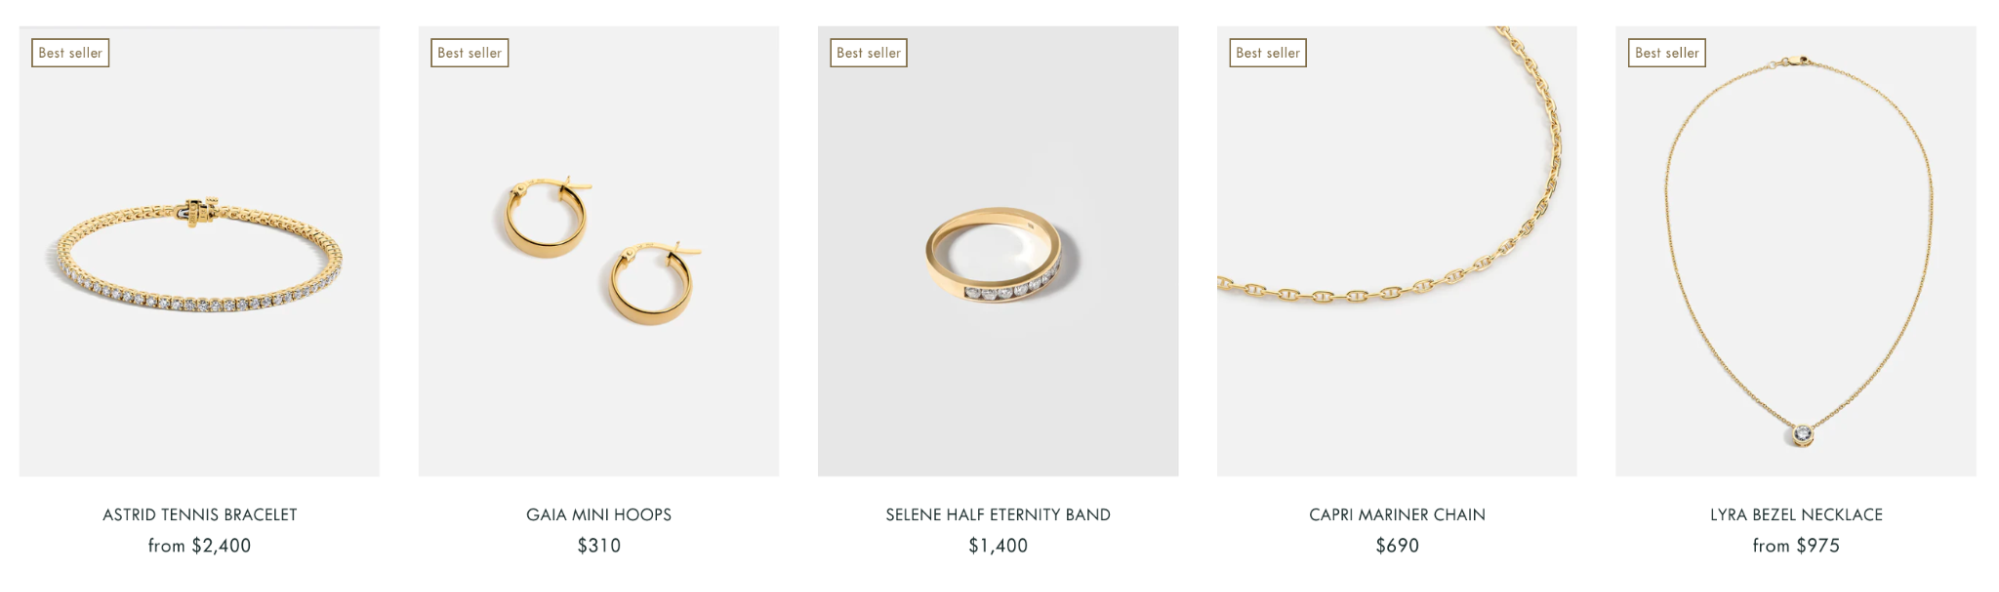 ROEN jewelry product photos with consistent white backgrounds for each product.